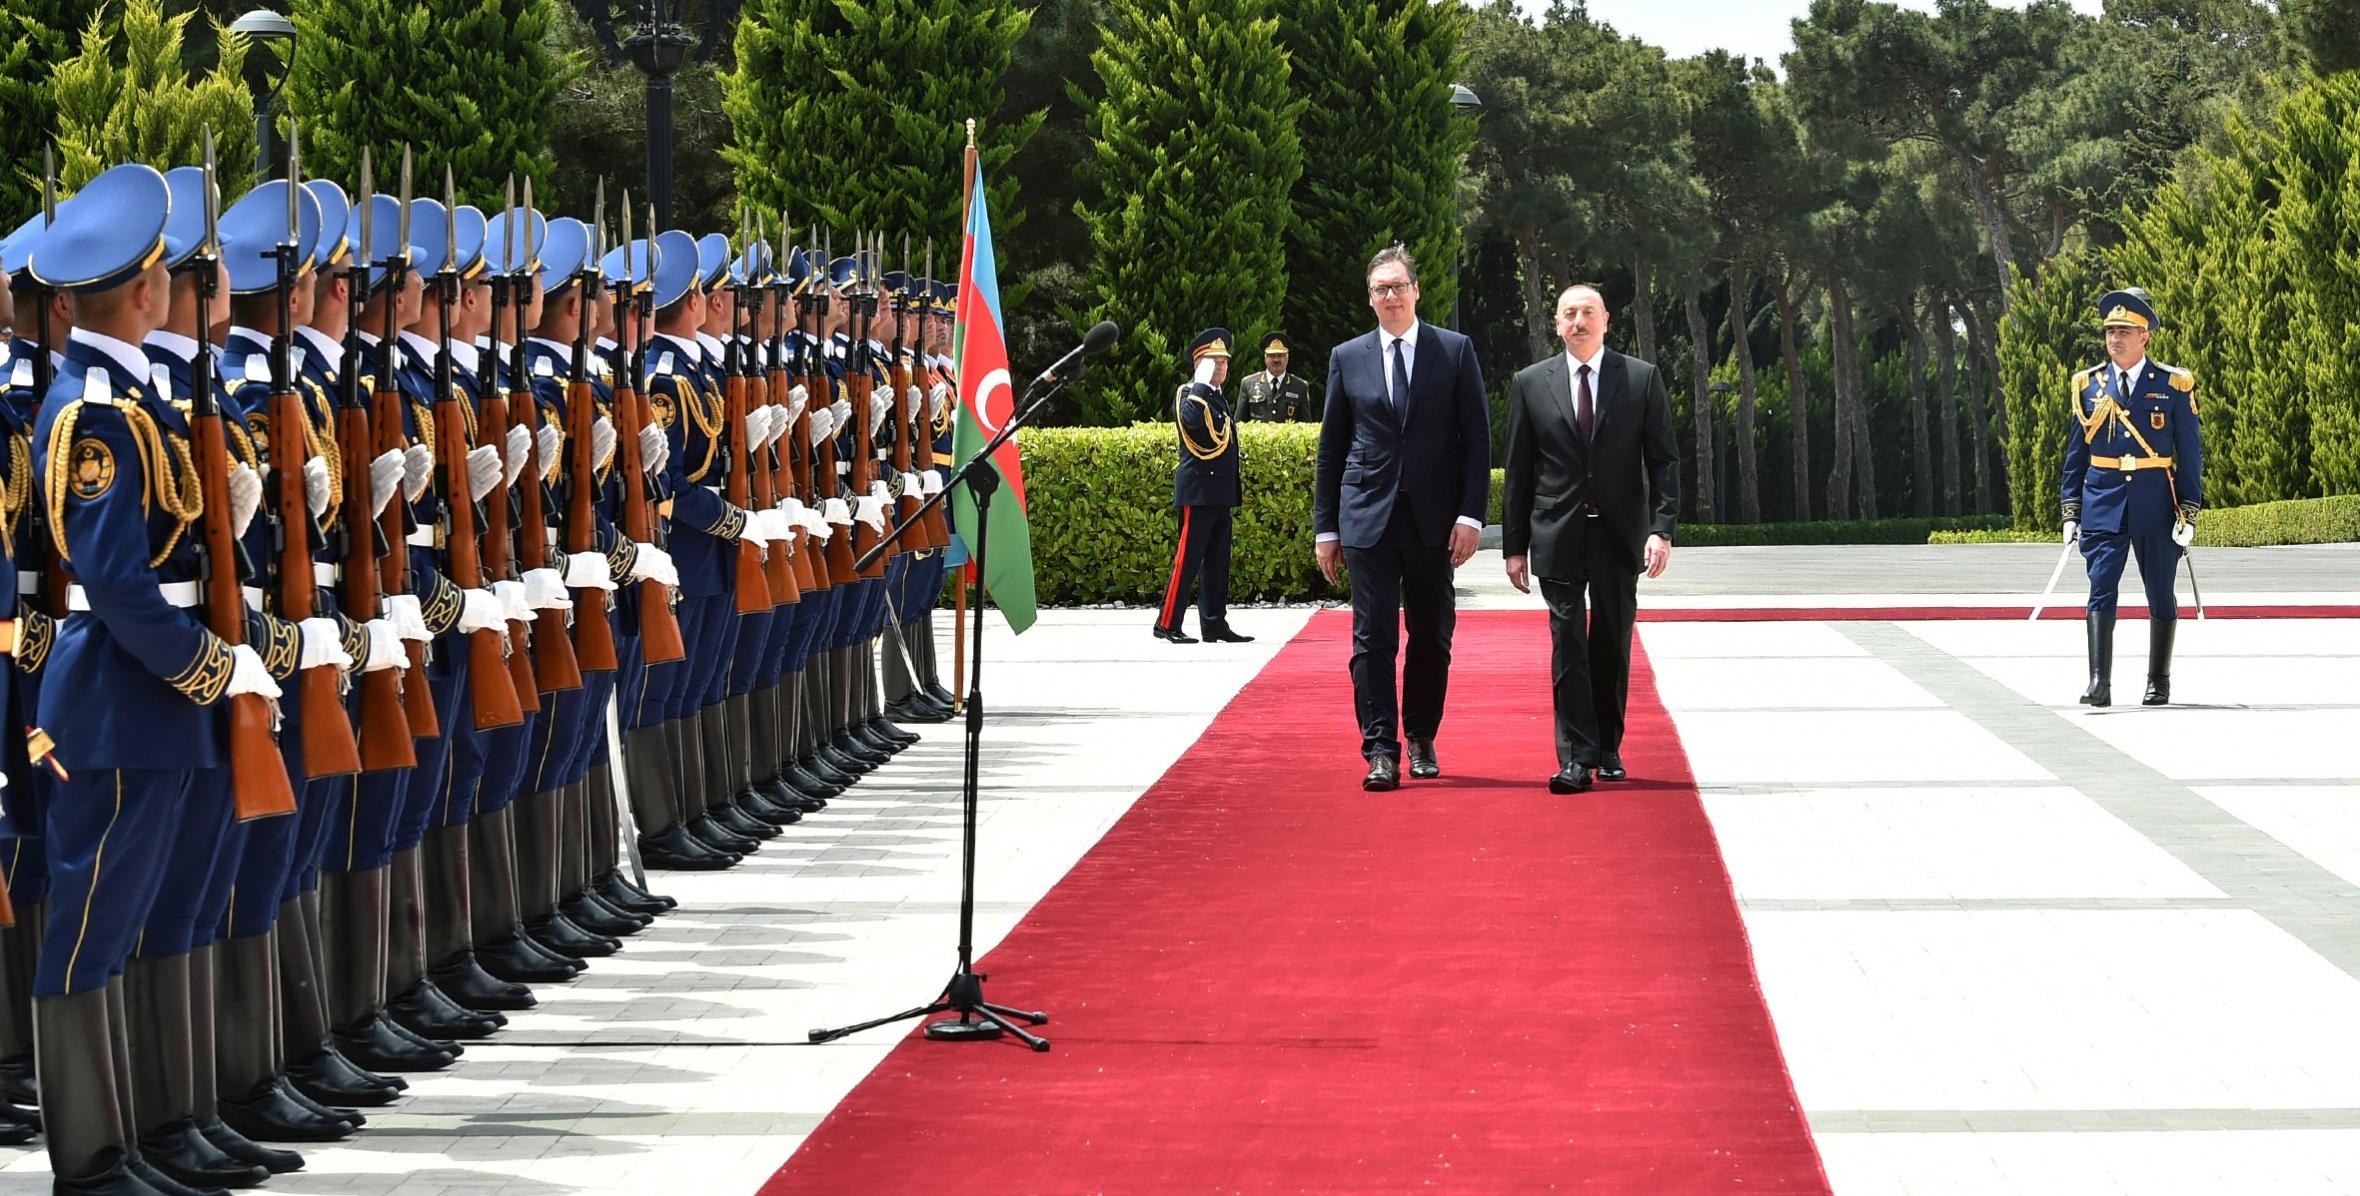 Official welcome ceremony was held for Serbaian President Aleksandar Vucic